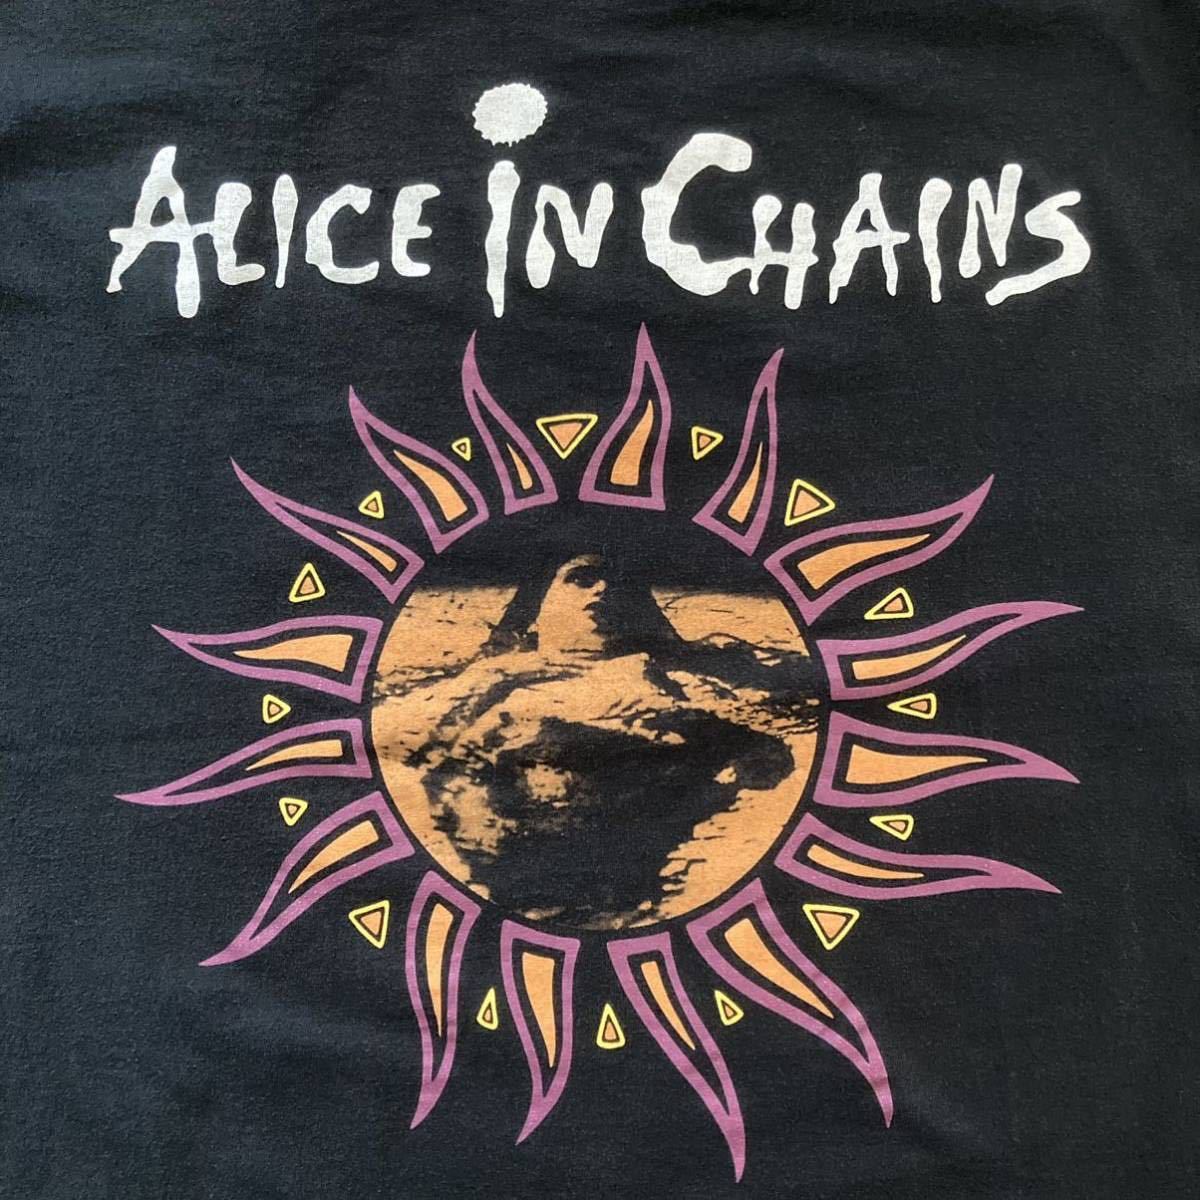 25％OFF】 新品、未使用 レア柄 Alice in Chains DIRT Tシャツ アリス